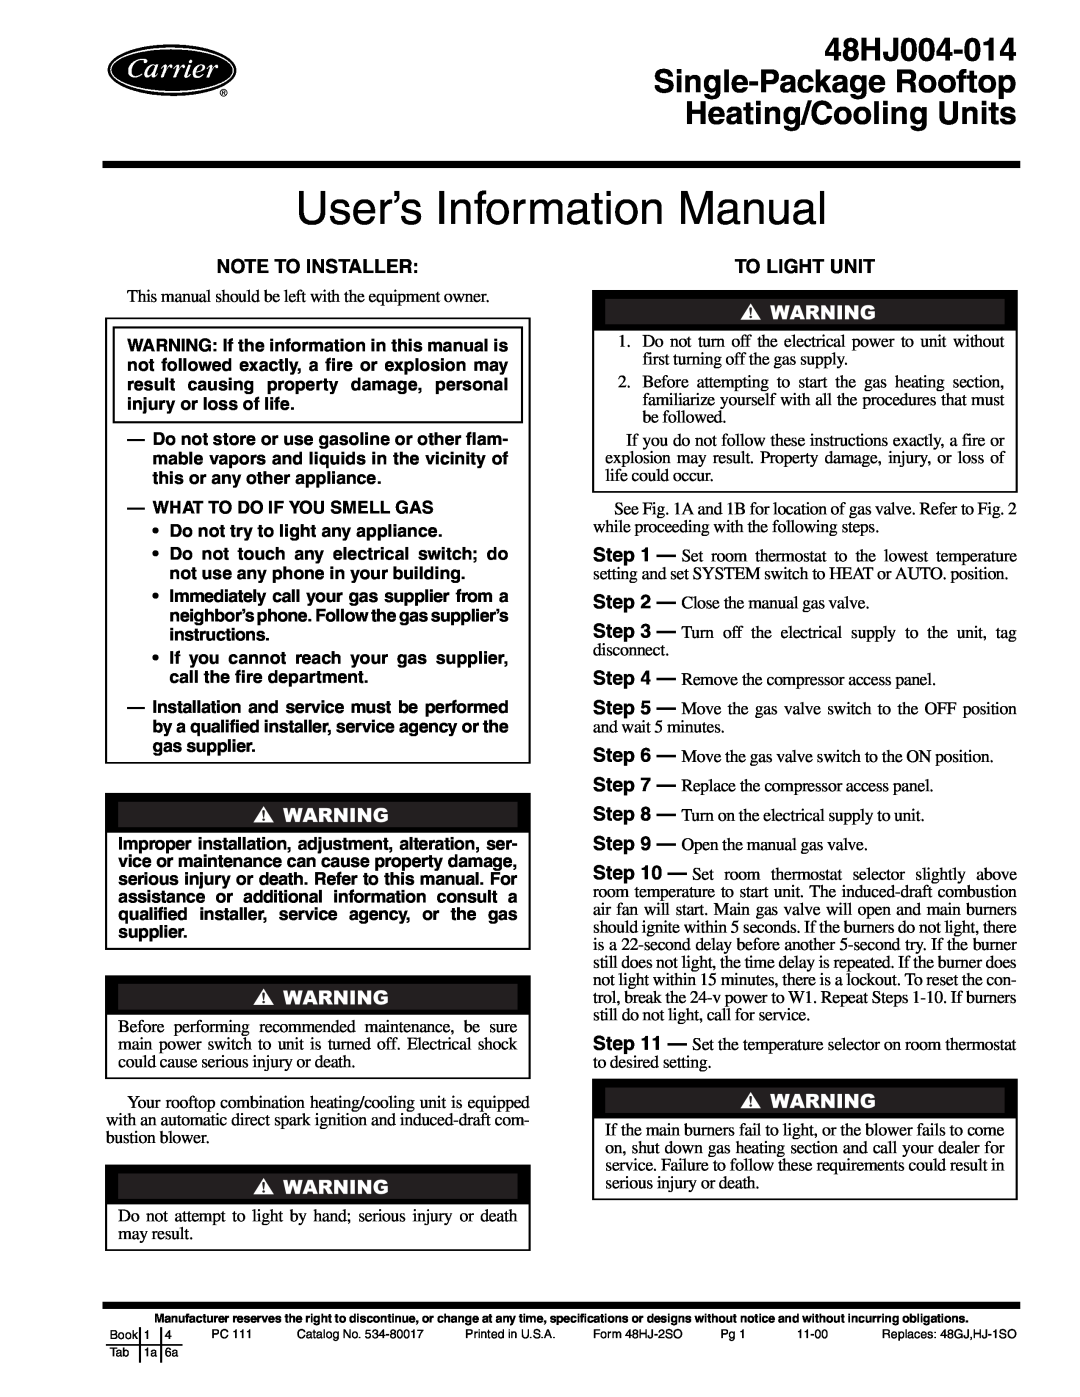 Carrier 48HJ004-014 specifications Note To Installer, To Light Unit, User’s Information Manual 